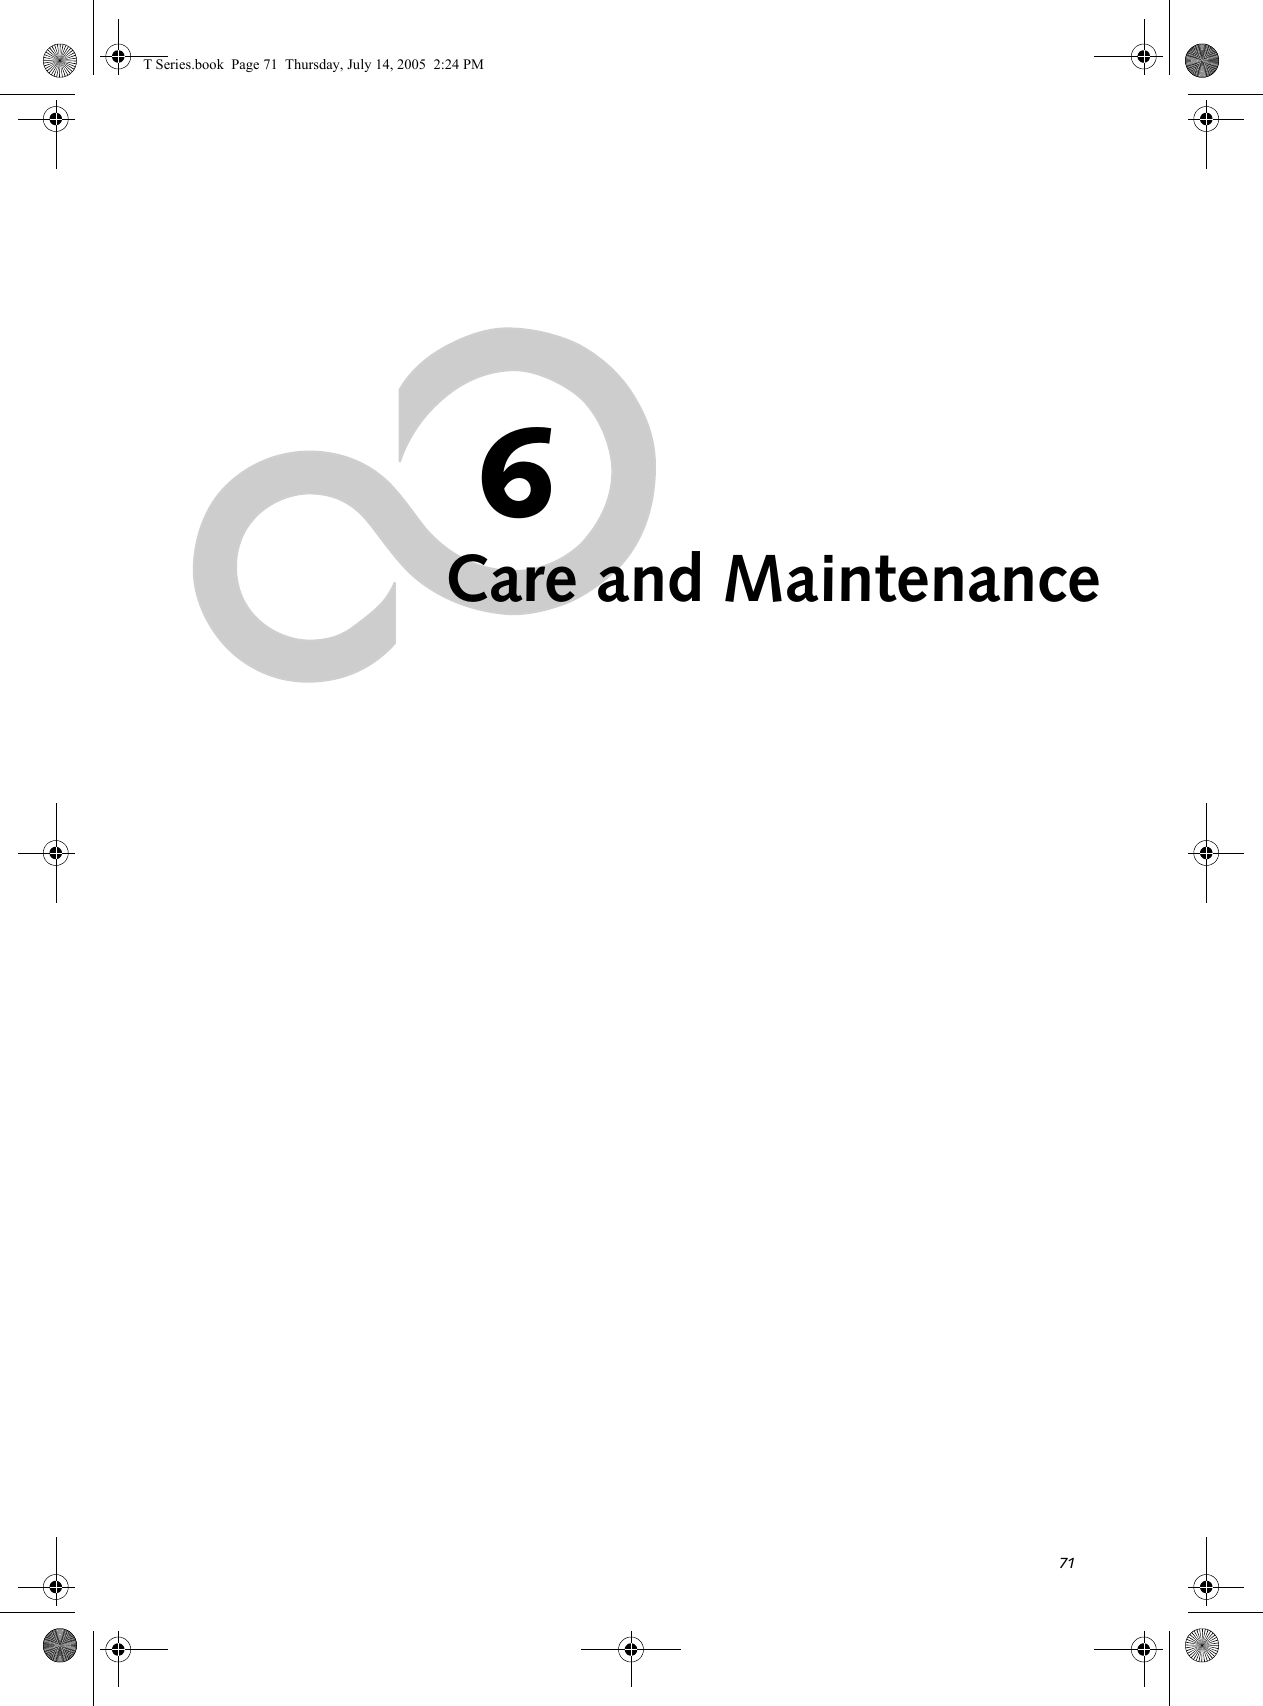 716Care and MaintenanceT Series.book  Page 71  Thursday, July 14, 2005  2:24 PM